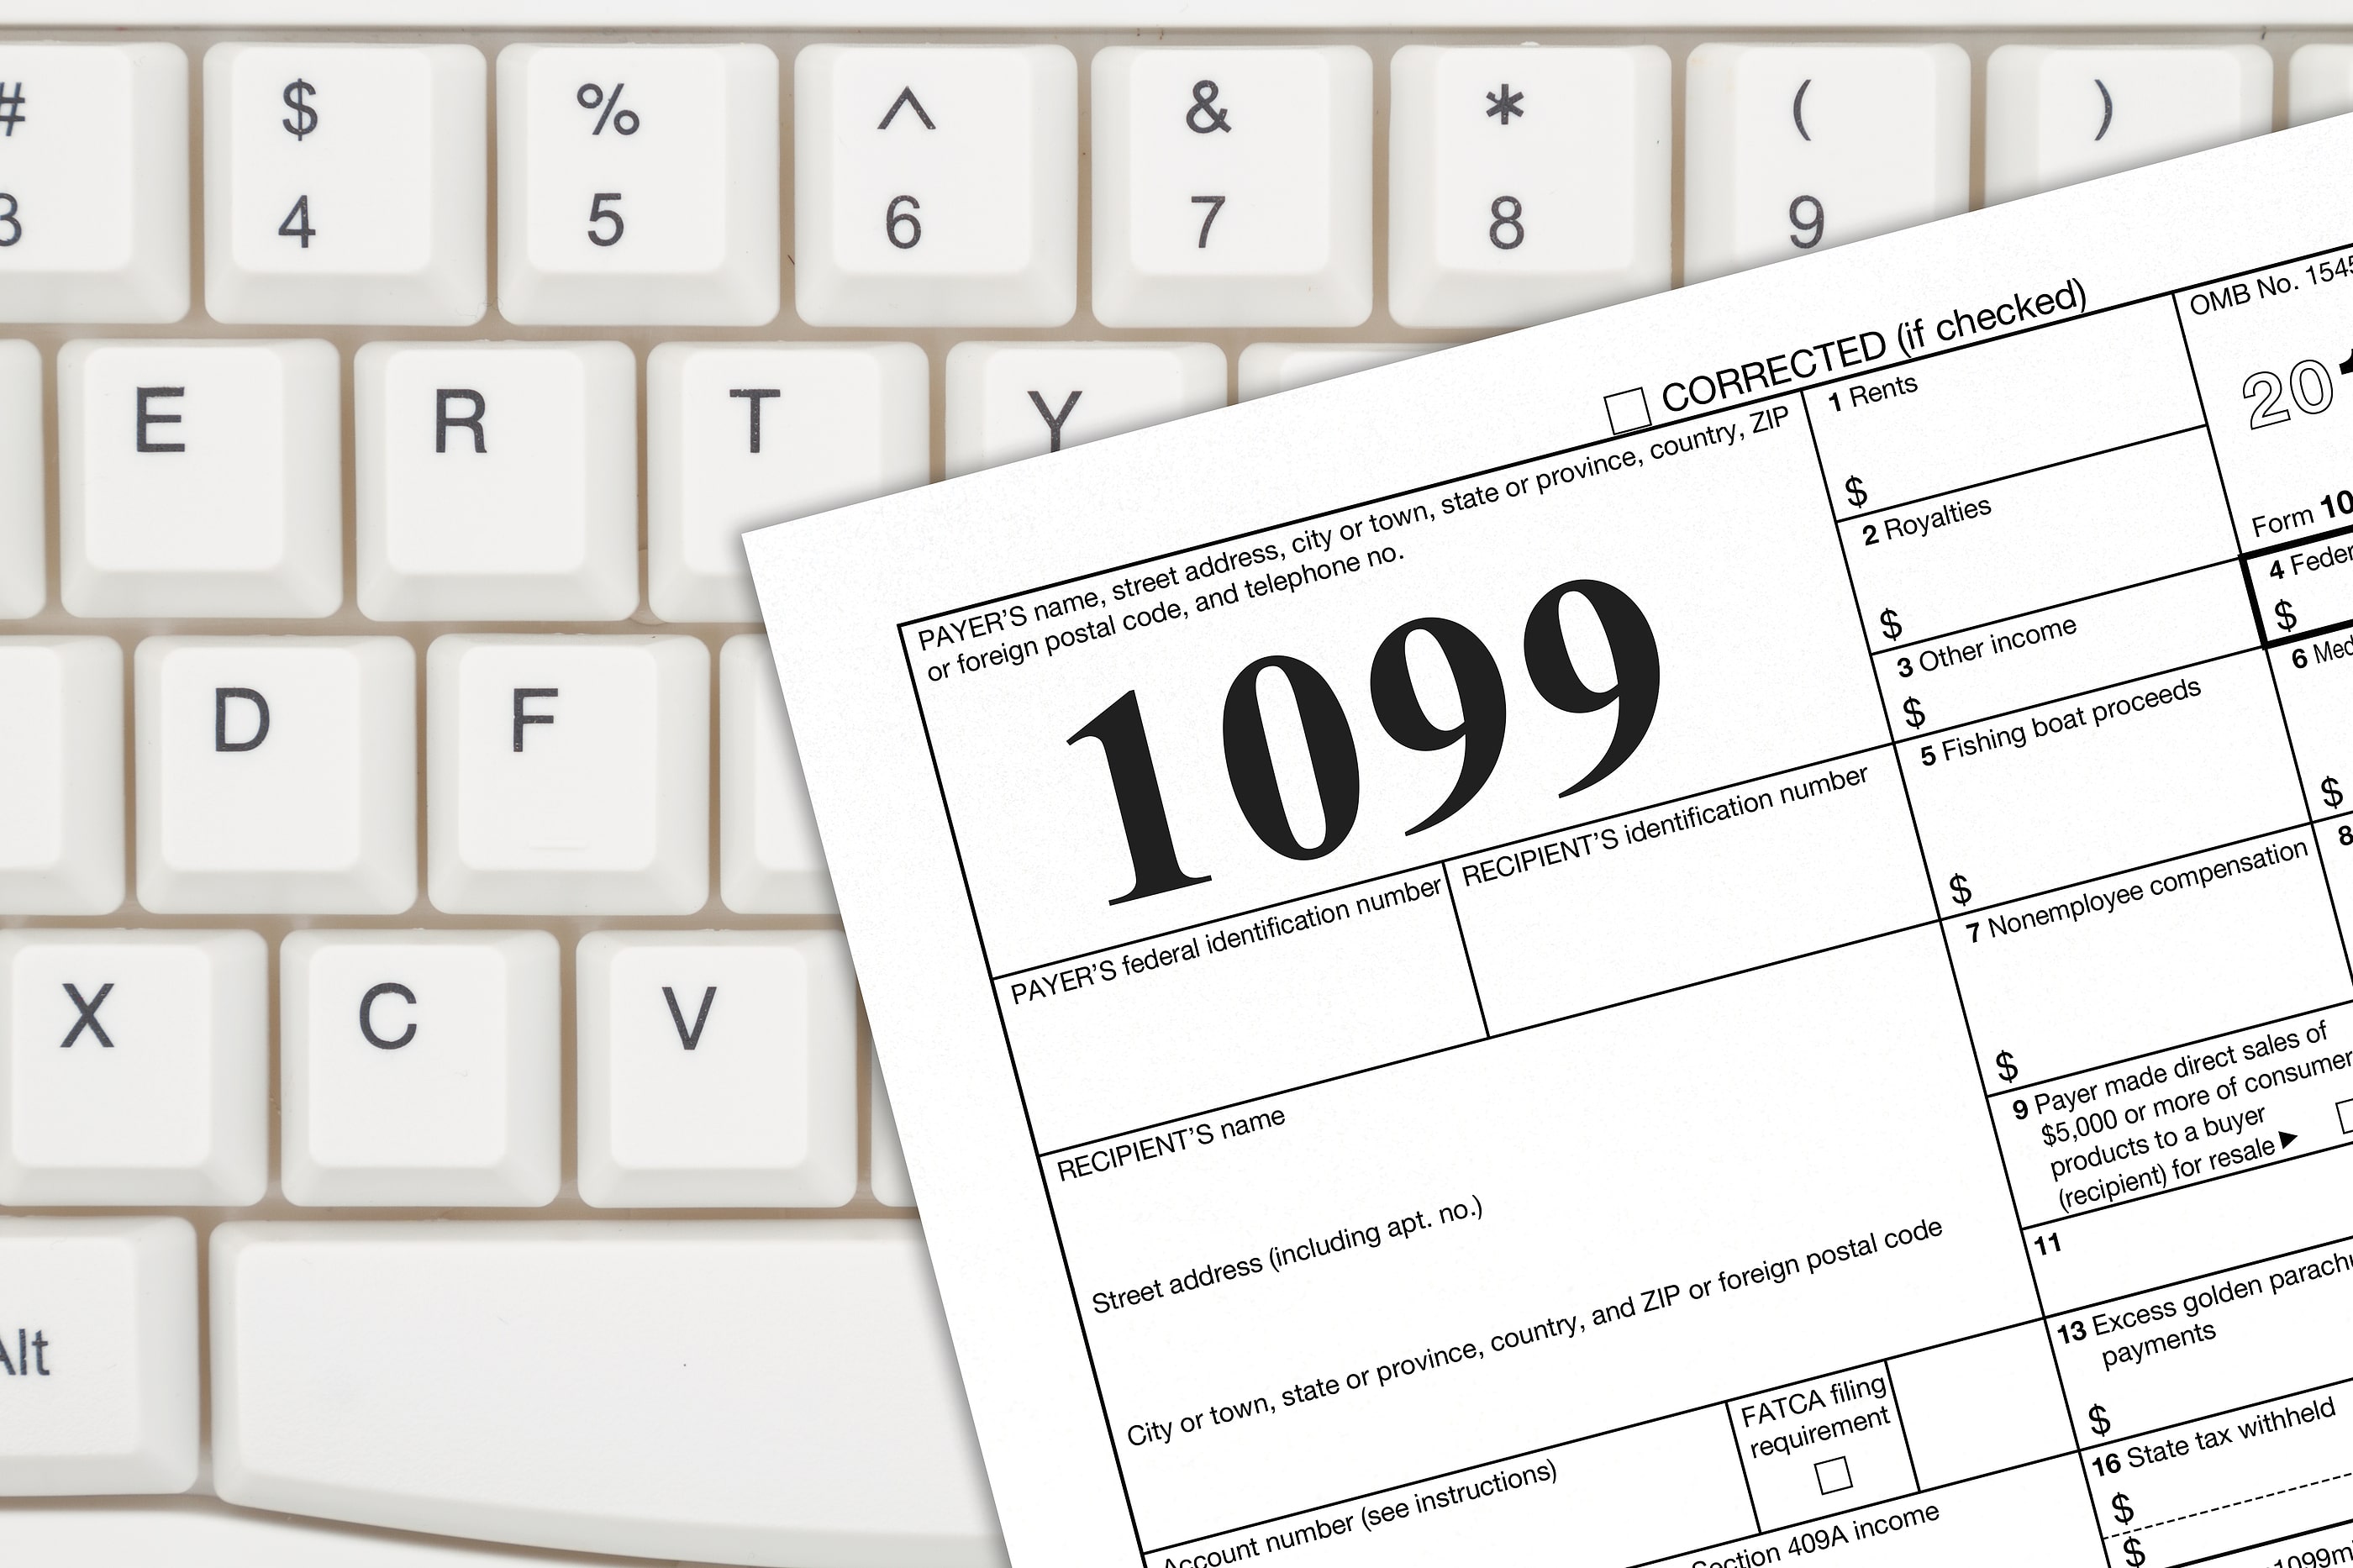 Miami Property Manager’s Guide to Tax Time and Sending 1099s to Landlords